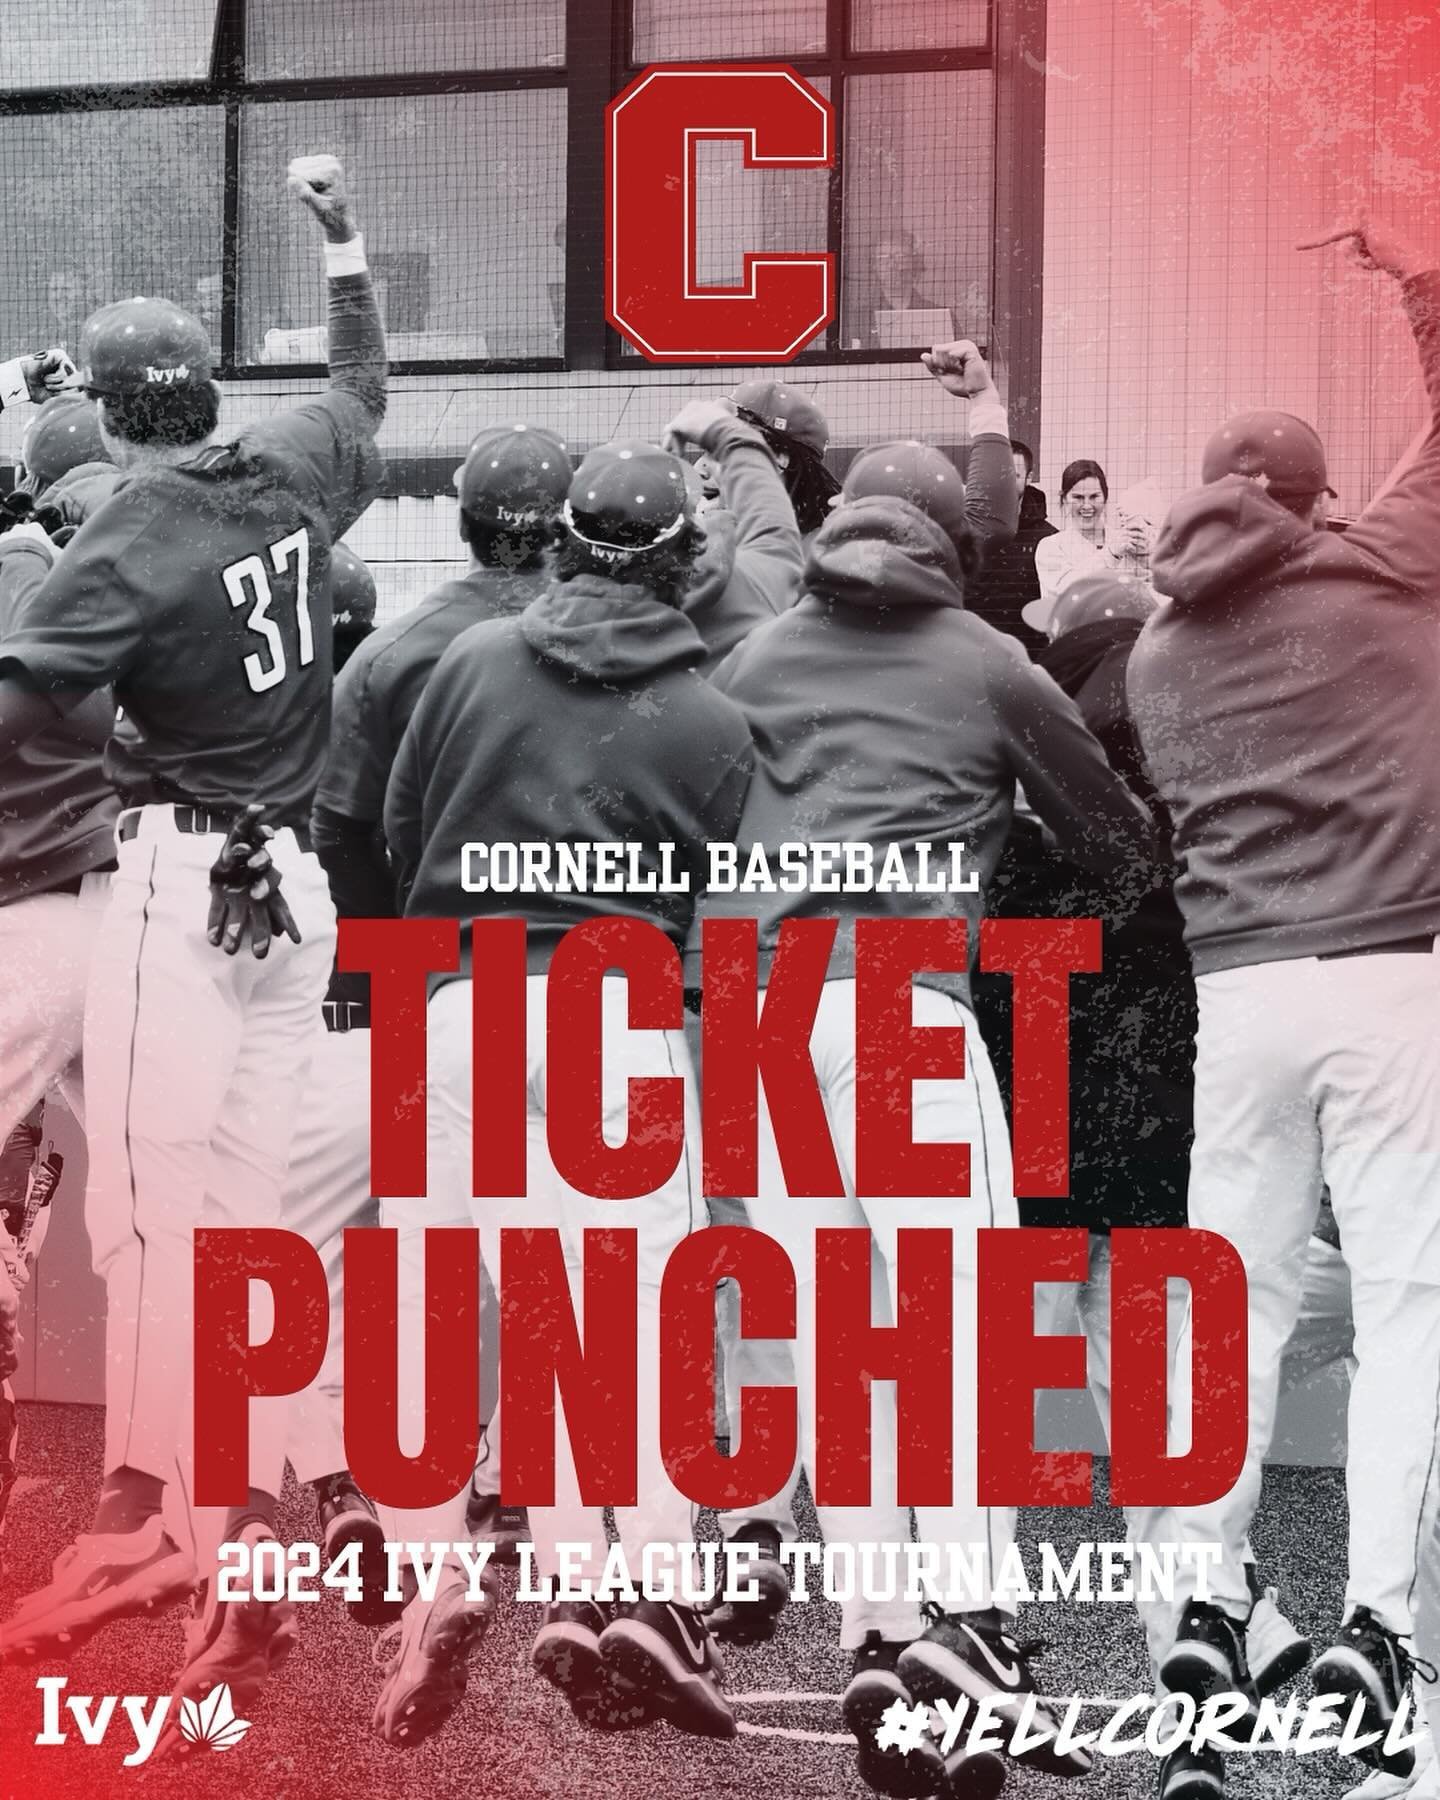 TICKET: PUNCHED ‼️🪩🕺

#YELLCORNELL